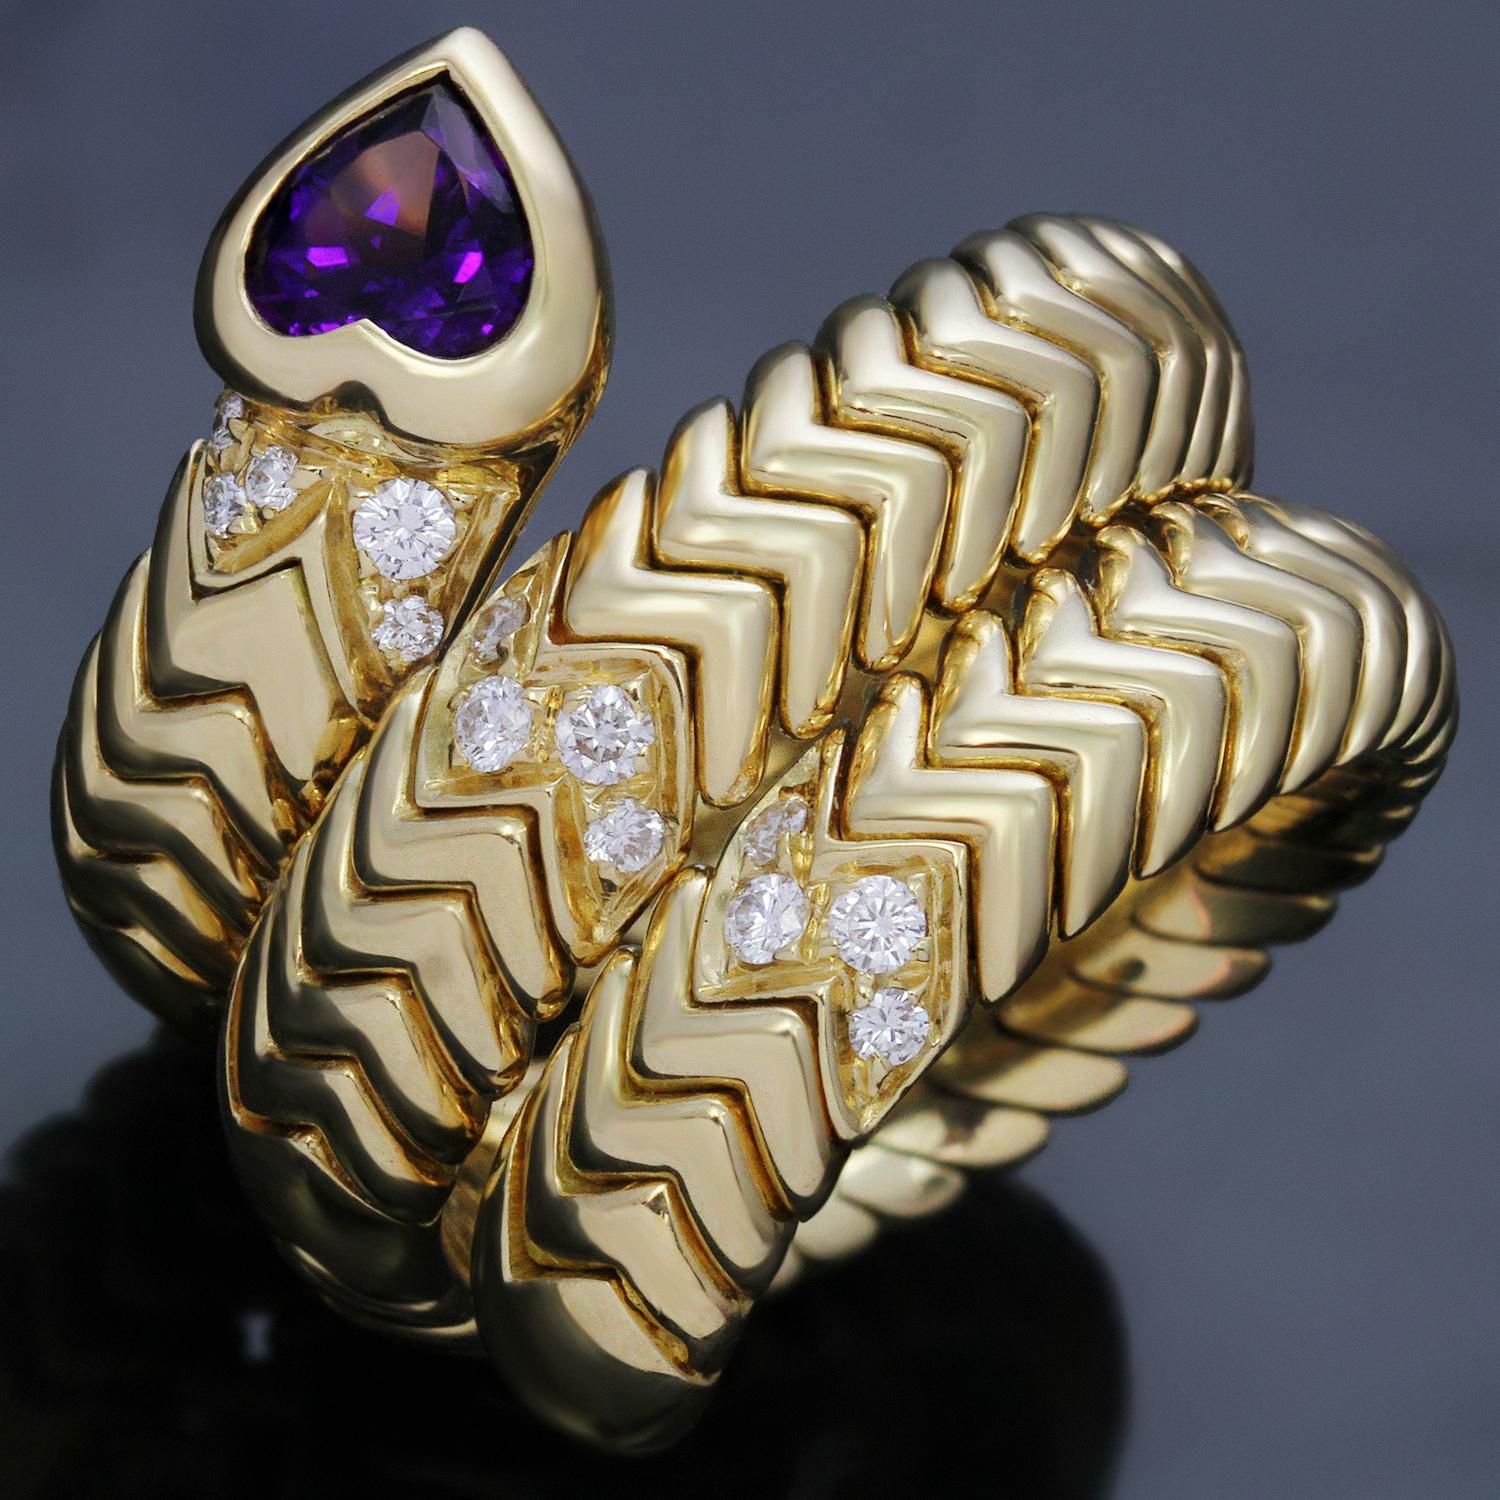 This stunning ring from Bulgari's iconic Spiga collection features a flexible 3-row geometric design crafted in 18k yellow gold and set with a heart-shaped amethyst and brilliant-cut round diamonds of an estimated 0.20 carats. Made in Italy circa